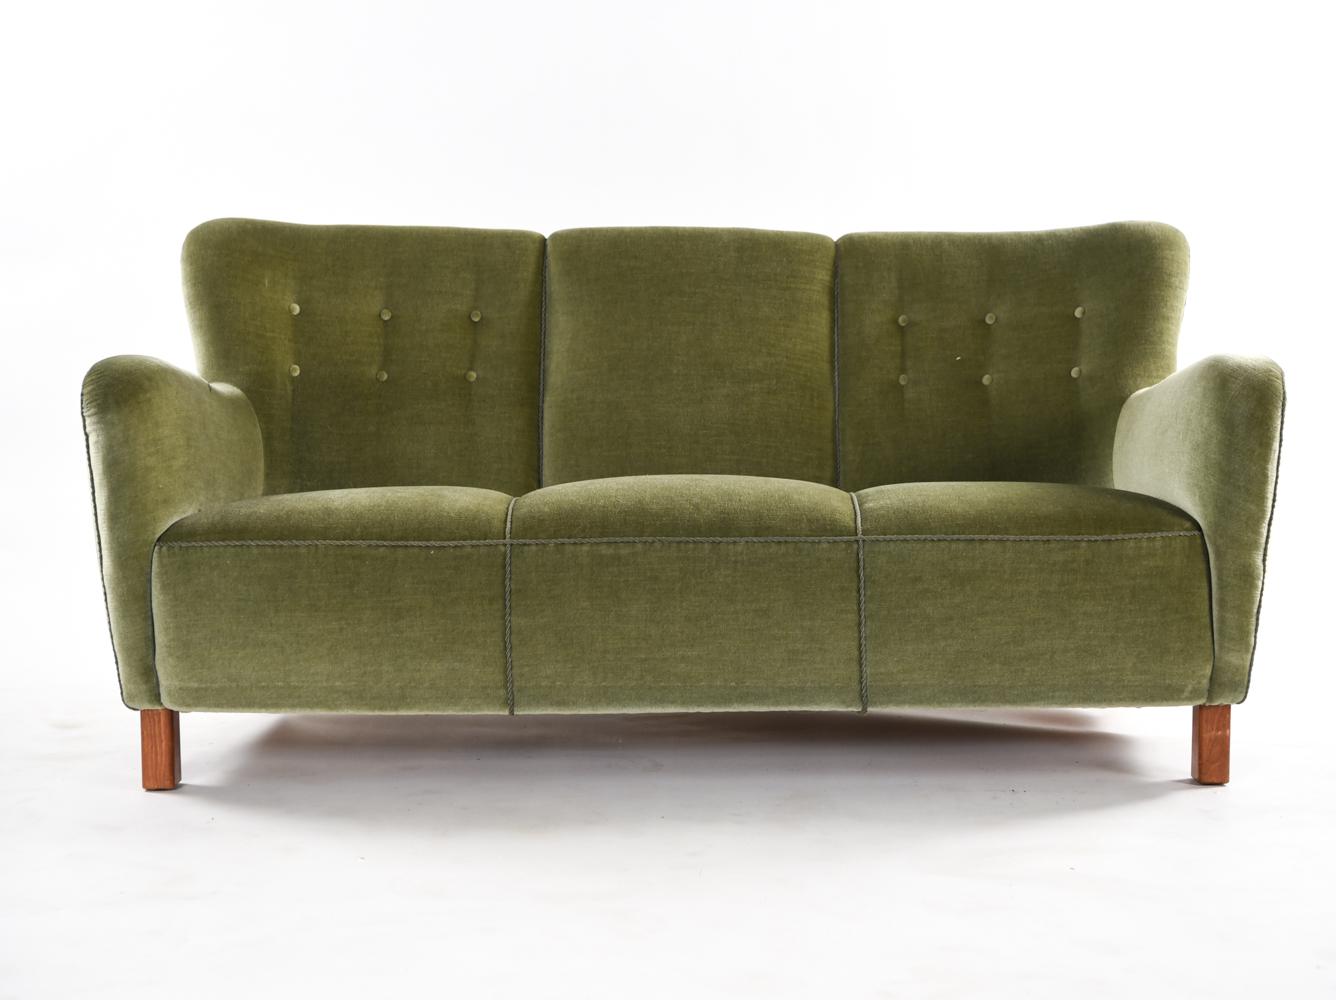 A model 1669 sofa by Fritz Hansen in the style of Mogens Lassen which can seat three comfortably. A timeless Art Deco inspired design with tufted upholstery.